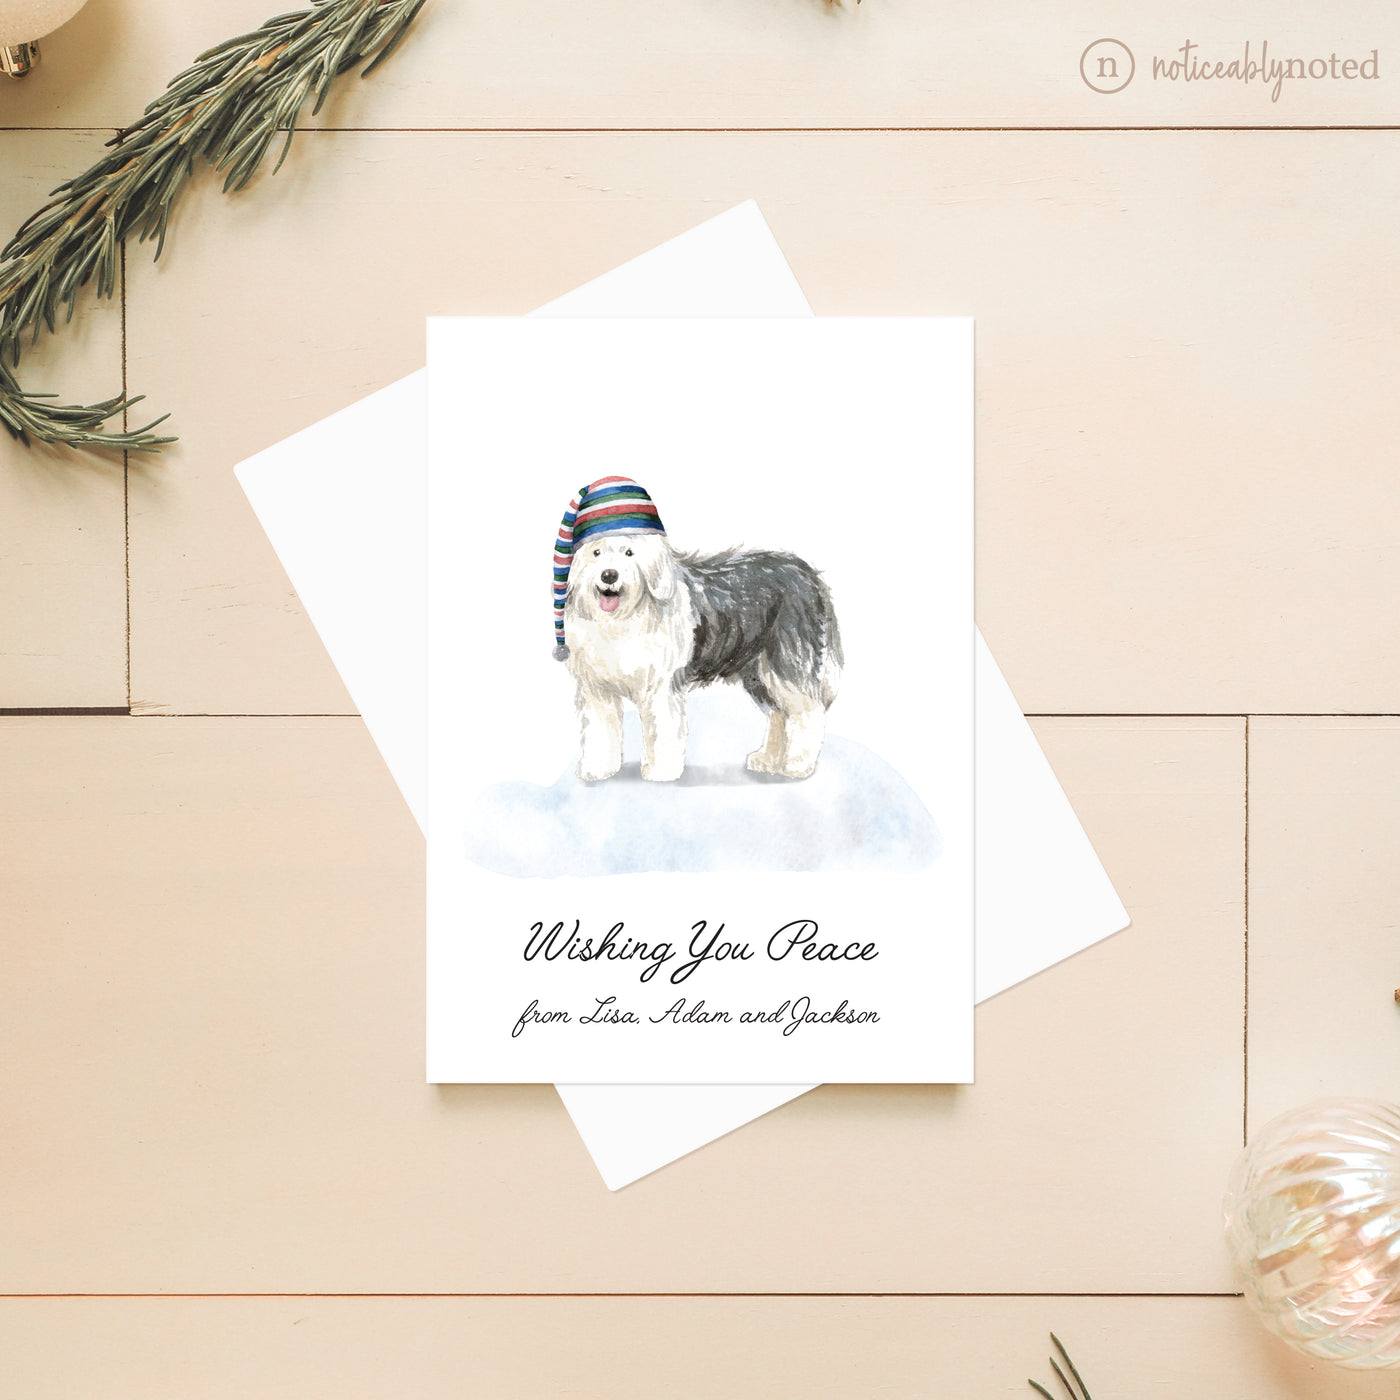 Old English Sheepdog Holiday Card | Noticeably Noted